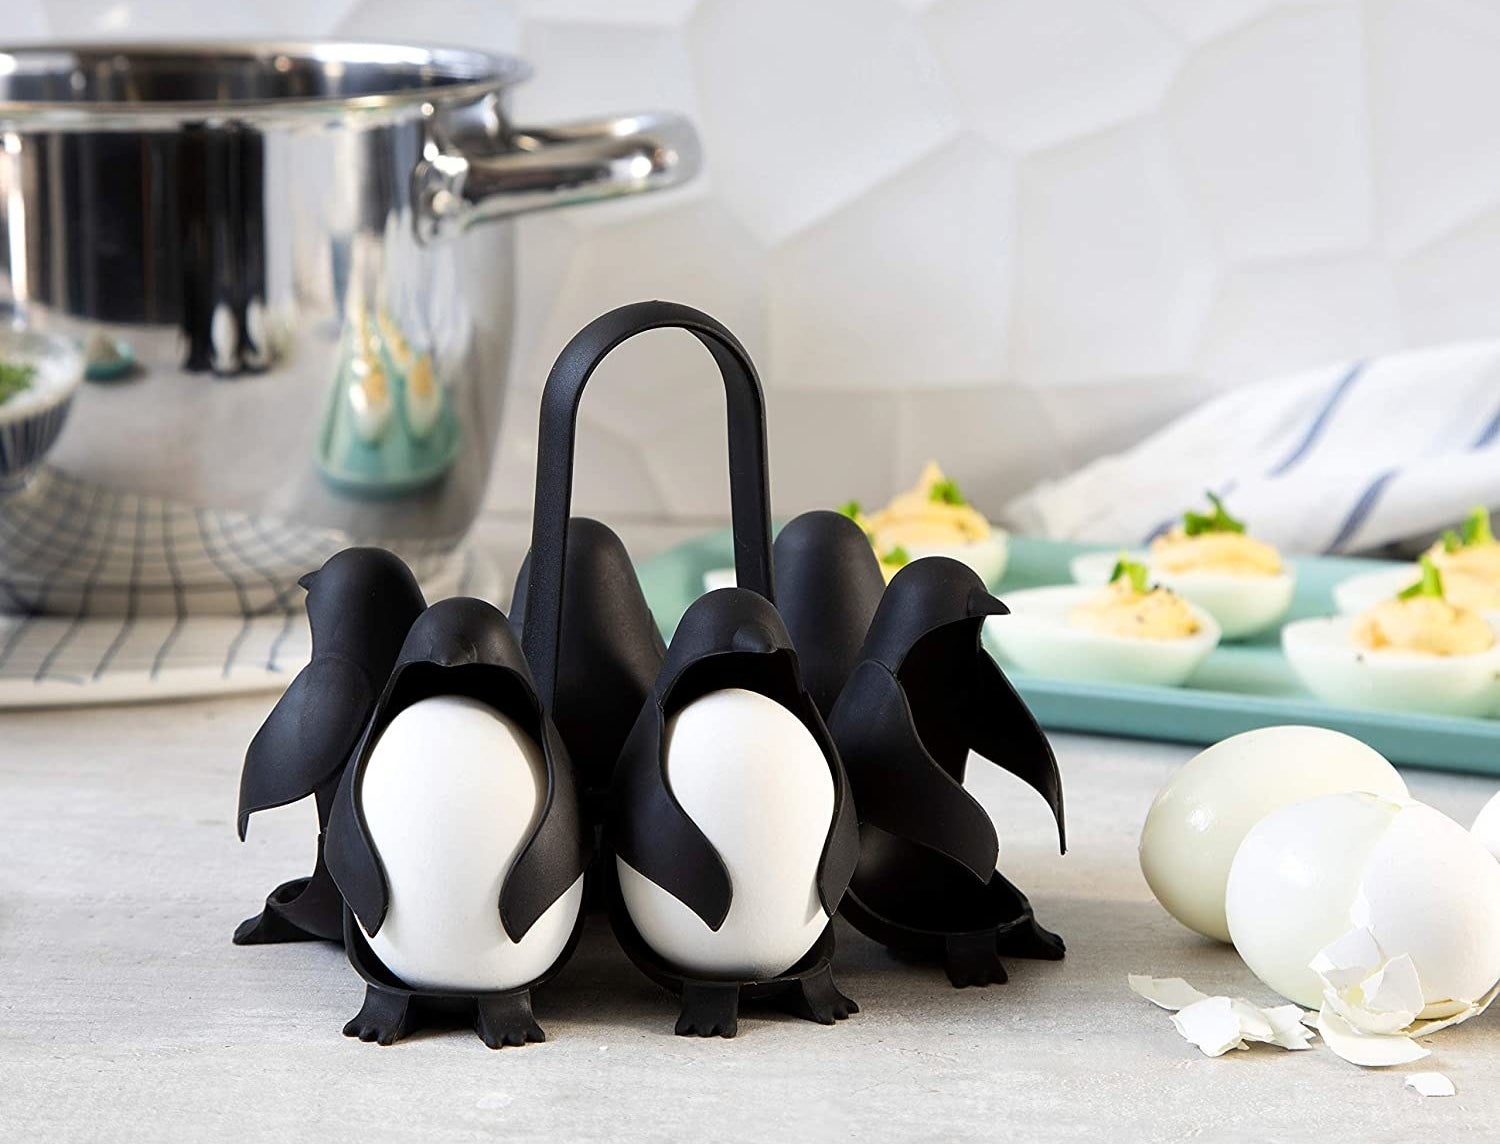 The egg holder, which looks six little penguins connected by a handle